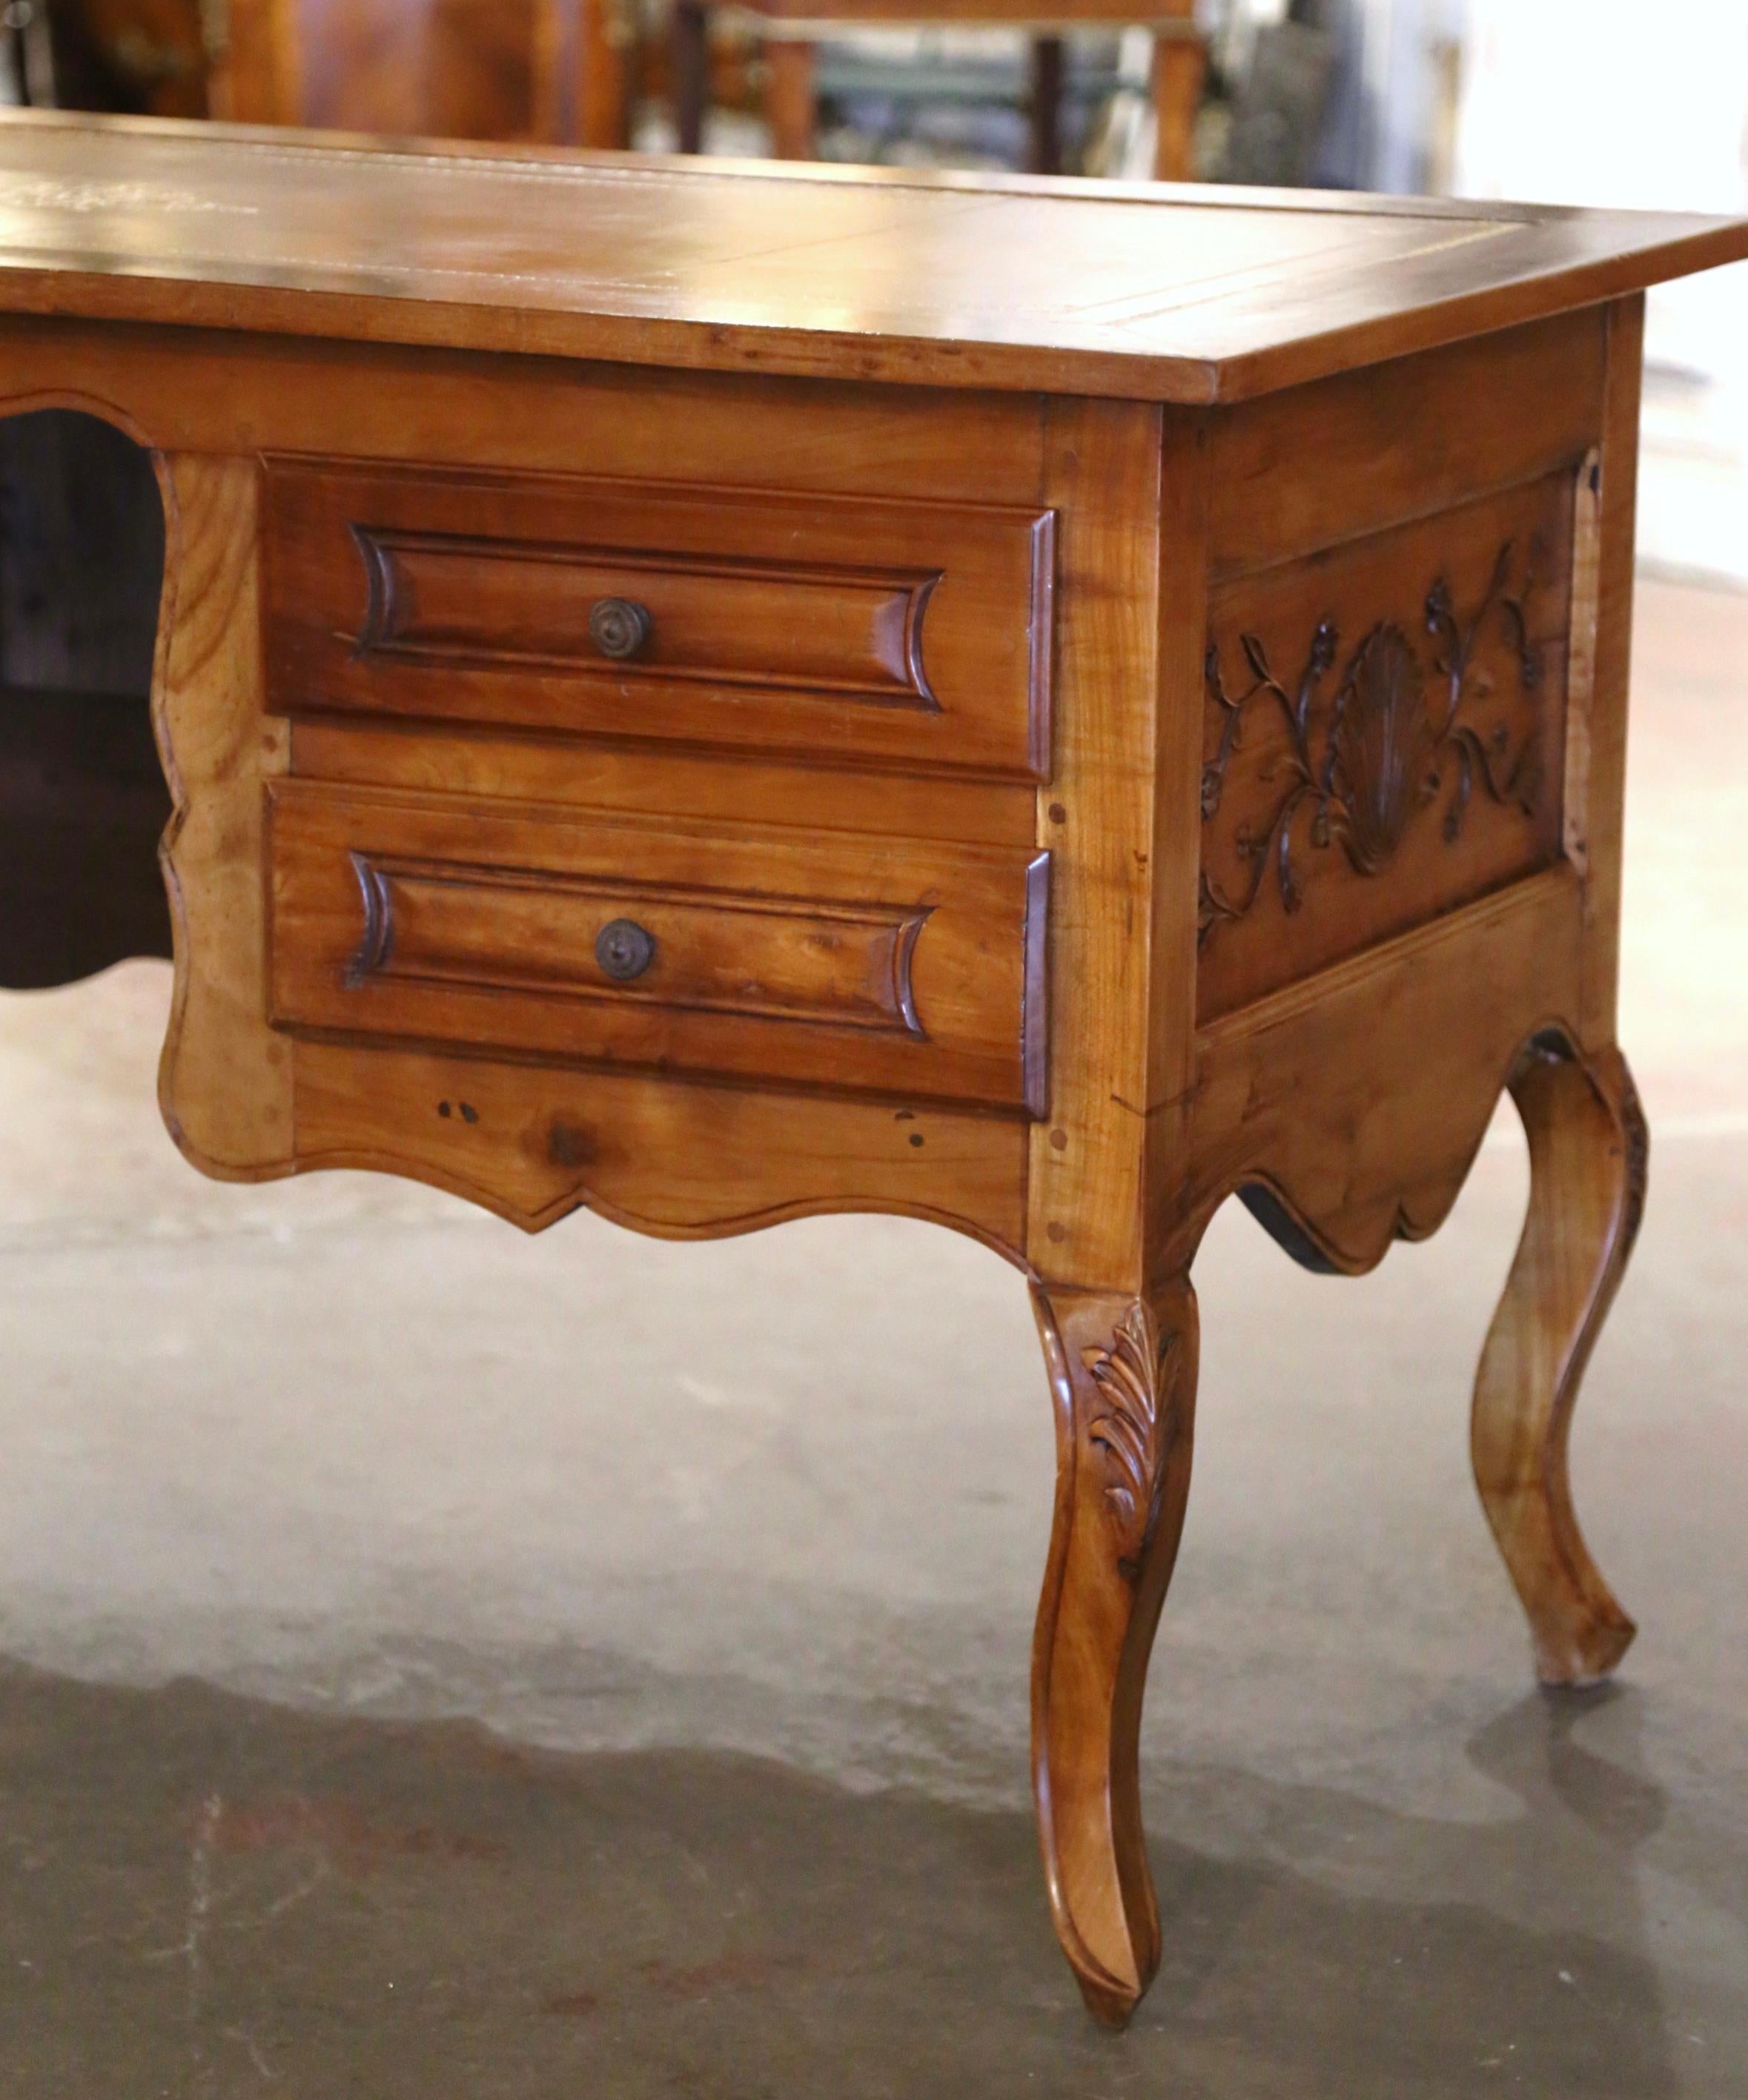 19th Century French Louis XV Carved Cherry Desk with Tan Leather Top In Excellent Condition For Sale In Dallas, TX